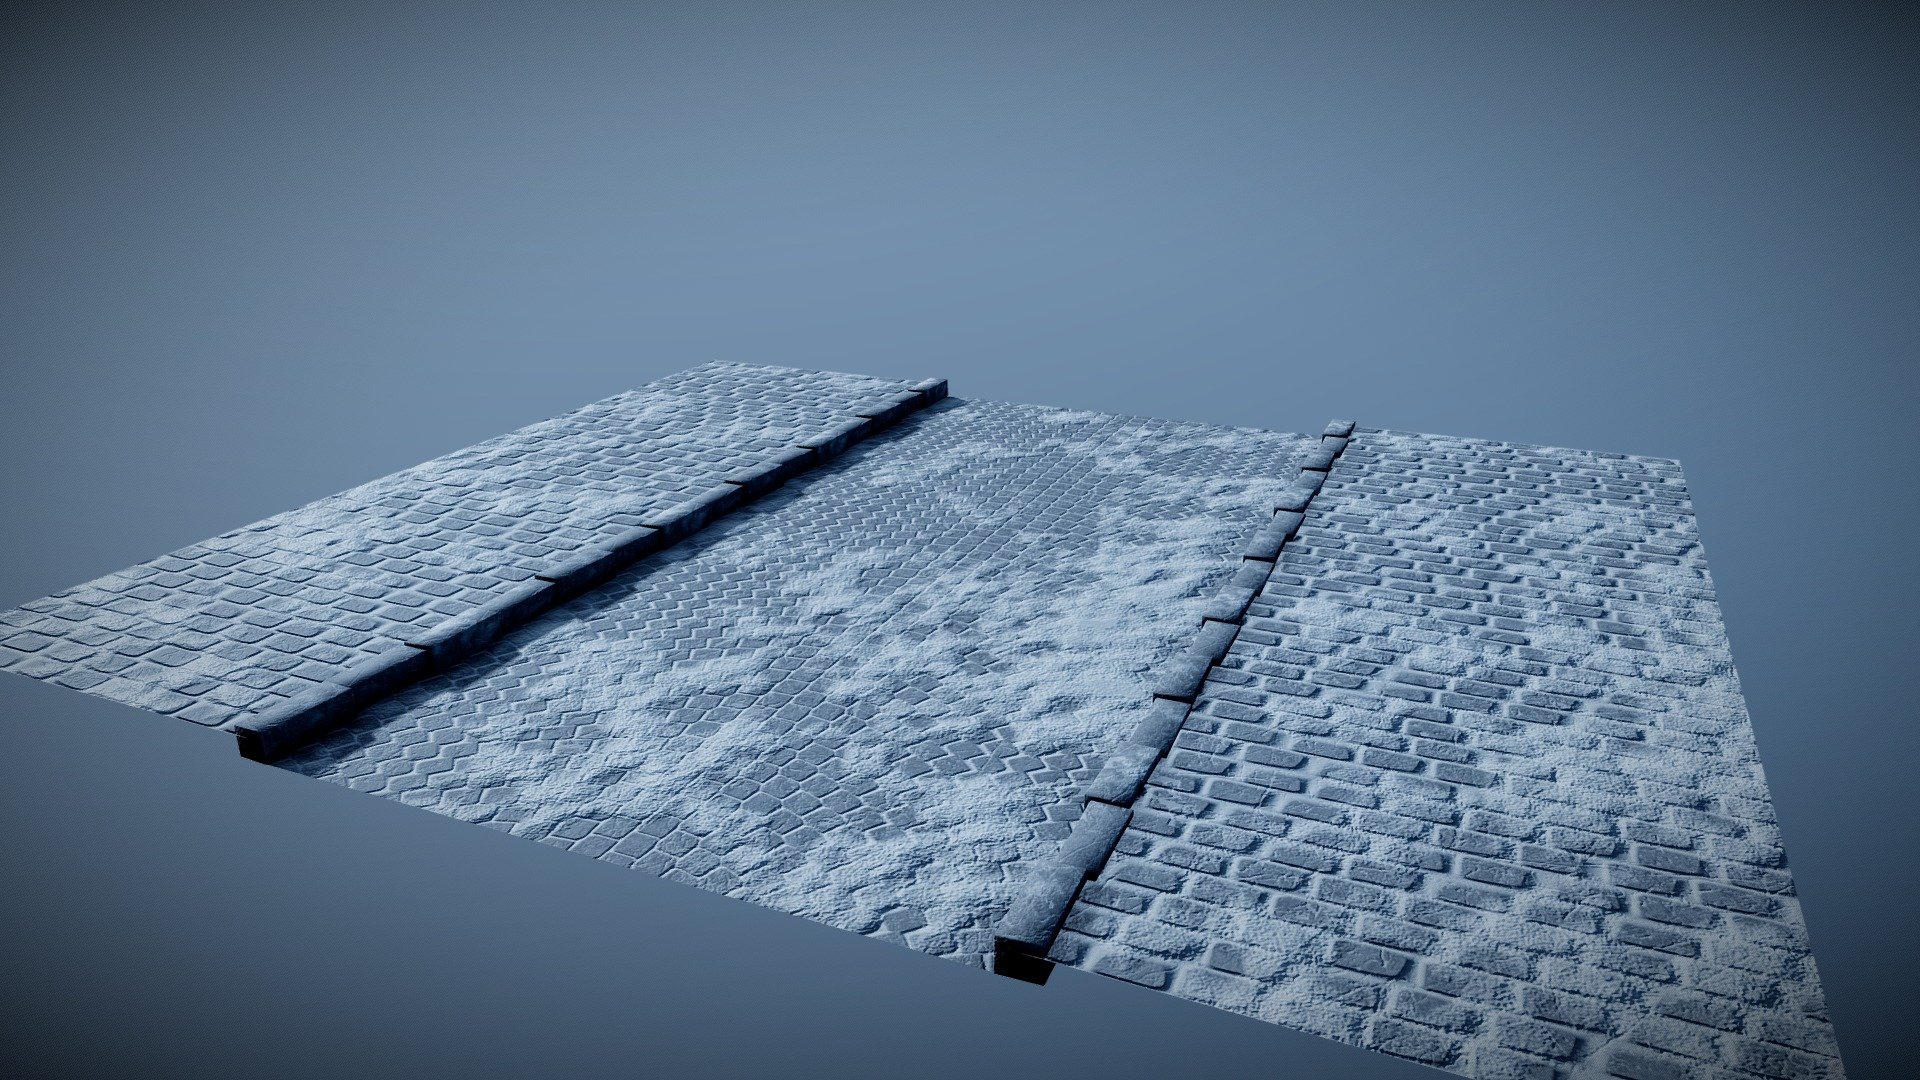 Snowy pavement tile for a scene I'm working on.

Tribute to a fantastic game.

2048 x 2048 textures.

Modeled in Blender and textured in Substance Painter 2017 3d model